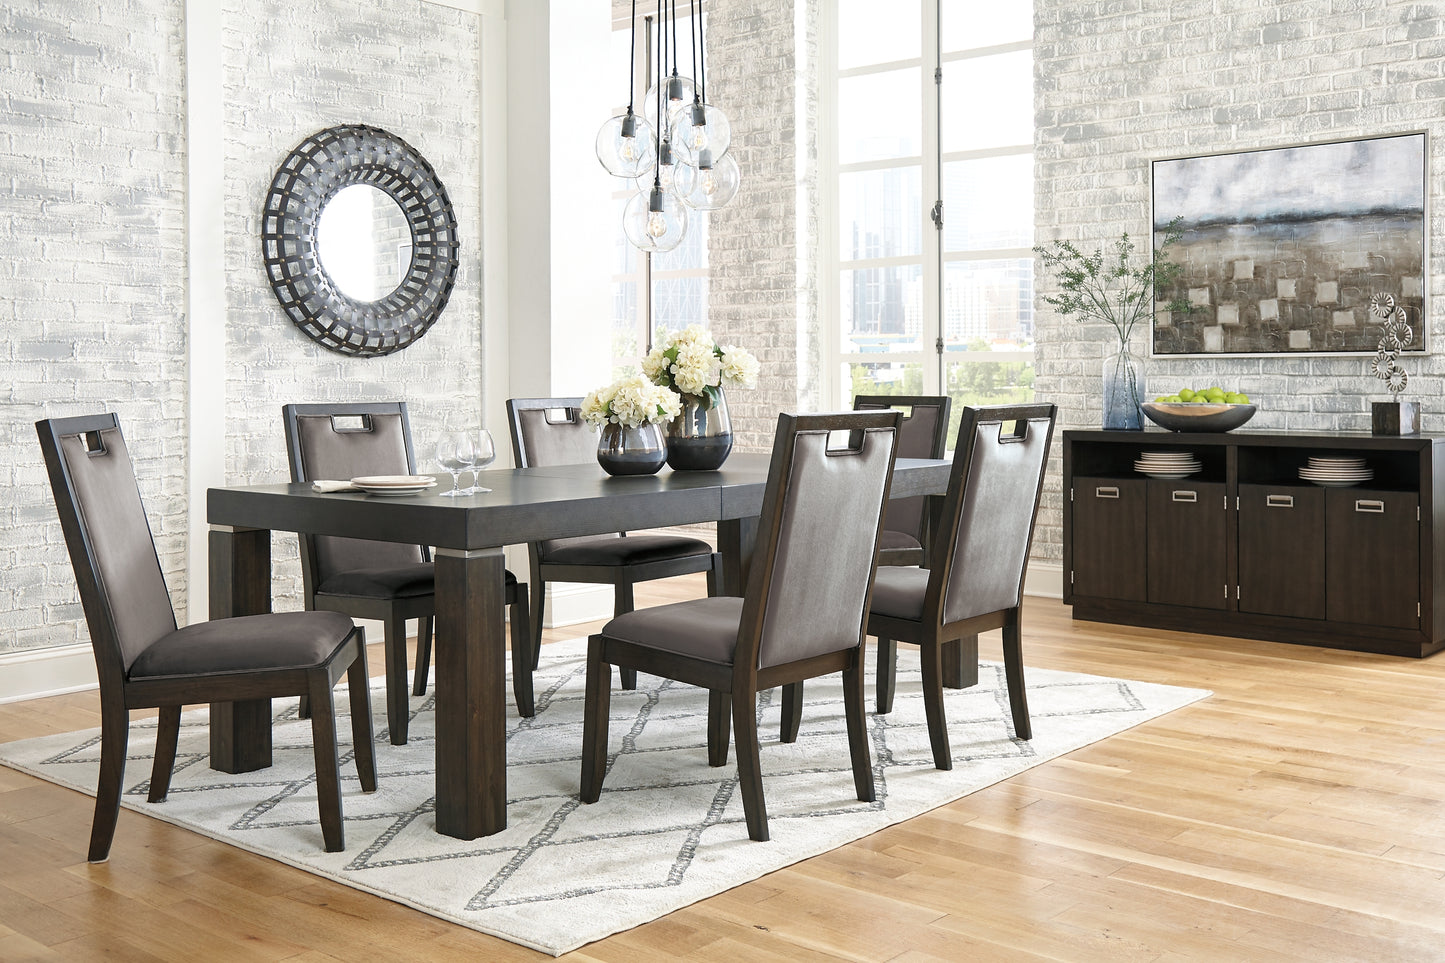 Hyndell Dining Table and 6 Chairs with Storage Wilson Furniture (OH)  in Bridgeport, Ohio. Serving Bridgeport, Yorkville, Bellaire, & Avondale